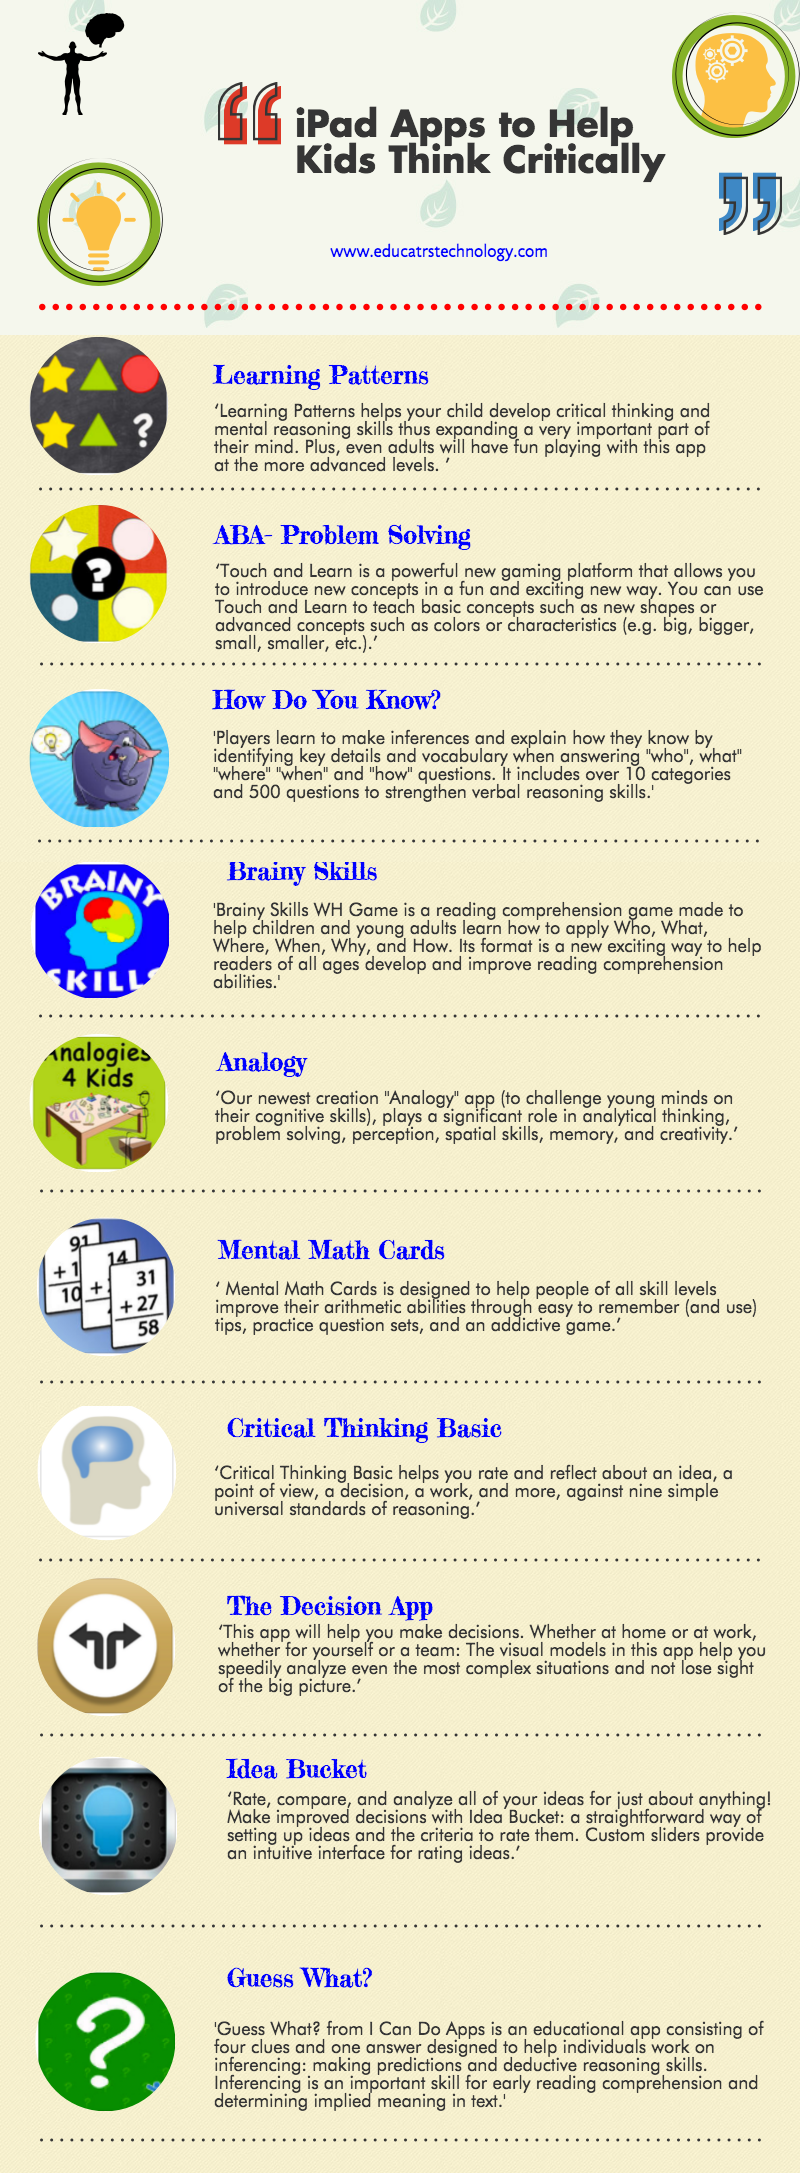 10 Very Good iPad Apps to Develop Students Critical Thinking Skills